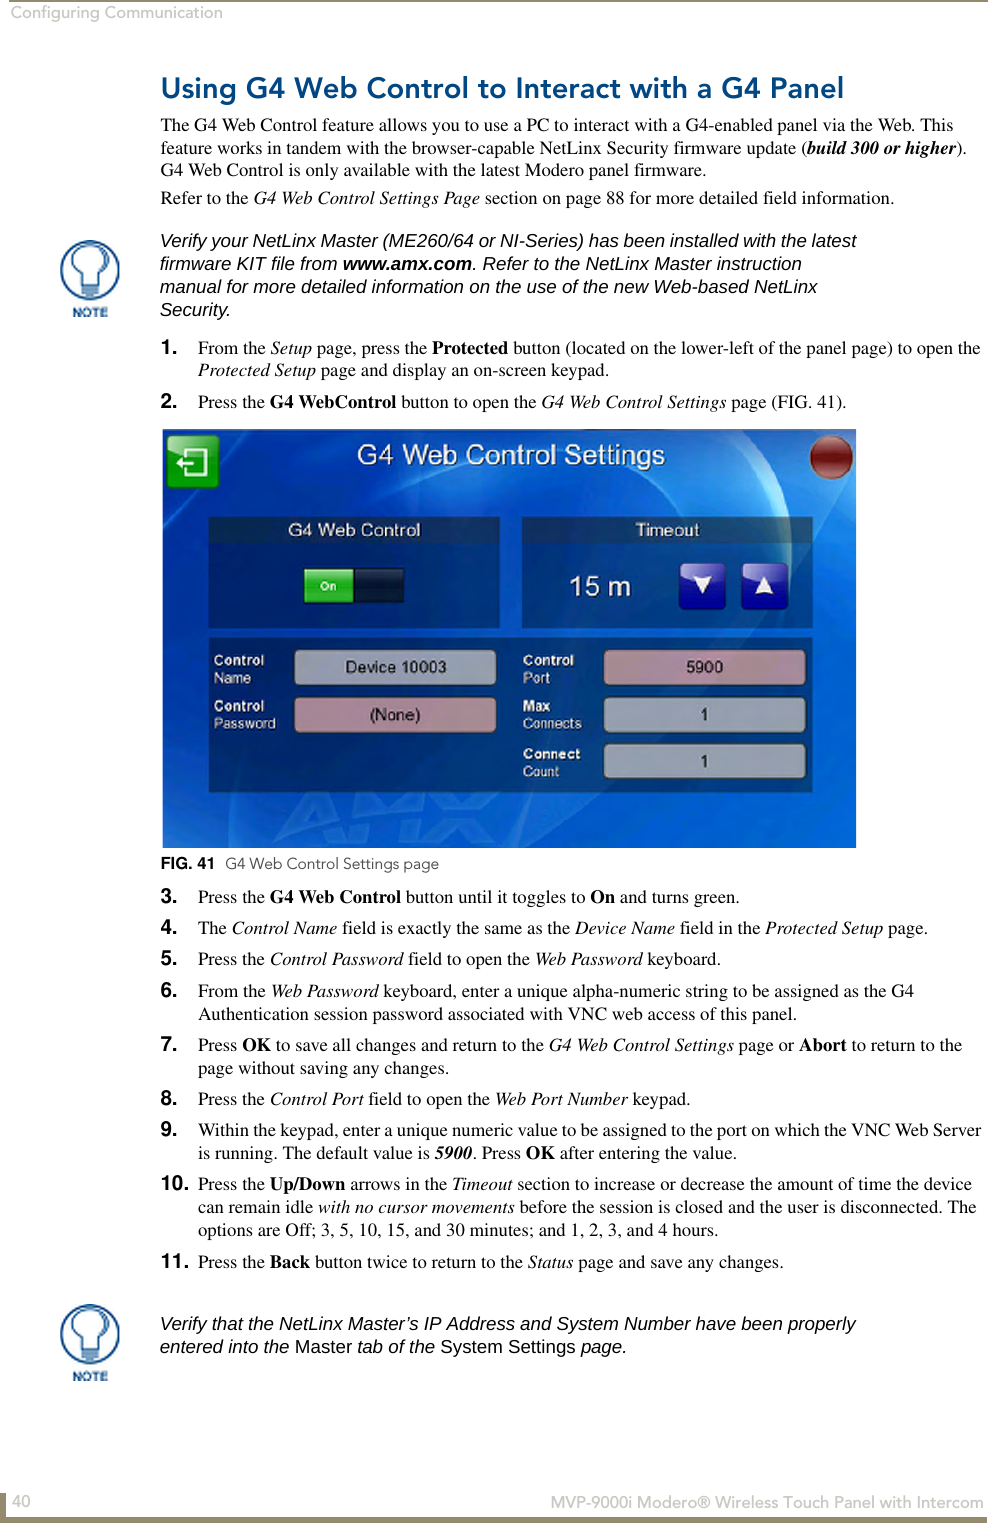 Configuring Communication40  MVP-9000i Modero® Wireless Touch Panel with IntercomUsing G4 Web Control to Interact with a G4 PanelThe G4 Web Control feature allows you to use a PC to interact with a G4-enabled panel via the Web. This feature works in tandem with the browser-capable NetLinx Security firmware update (build 300 or higher). G4 Web Control is only available with the latest Modero panel firmware. Refer to the G4 Web Control Settings Page section on page 88 for more detailed field information.1. From the Setup page, press the Protected button (located on the lower-left of the panel page) to open the Protected Setup page and display an on-screen keypad.2. Press the G4 WebControl button to open the G4 Web Control Settings page (FIG. 41). 3. Press the G4 Web Control button until it toggles to On and turns green.4. The Control Name field is exactly the same as the Device Name field in the Protected Setup page.5. Press the Control Password field to open the Web Password keyboard.6. From the Web Password keyboard, enter a unique alpha-numeric string to be assigned as the G4 Authentication session password associated with VNC web access of this panel.7. Press OK to save all changes and return to the G4 Web Control Settings page or Abort to return to the page without saving any changes.8. Press the Control Port field to open the Web Port Number keypad.9. Within the keypad, enter a unique numeric value to be assigned to the port on which the VNC Web Server is running. The default value is 5900. Press OK after entering the value.10. Press the Up/Down arrows in the Timeout section to increase or decrease the amount of time the device can remain idle with no cursor movements before the session is closed and the user is disconnected. The options are Off; 3, 5, 10, 15, and 30 minutes; and 1, 2, 3, and 4 hours.11. Press the Back button twice to return to the Status page and save any changes.Verify your NetLinx Master (ME260/64 or NI-Series) has been installed with the latest firmware KIT file from www.amx.com. Refer to the NetLinx Master instruction manual for more detailed information on the use of the new Web-based NetLinx Security.FIG. 41  G4 Web Control Settings pageVerify that the NetLinx Master’s IP Address and System Number have been properly entered into the Master tab of the System Settings page. 